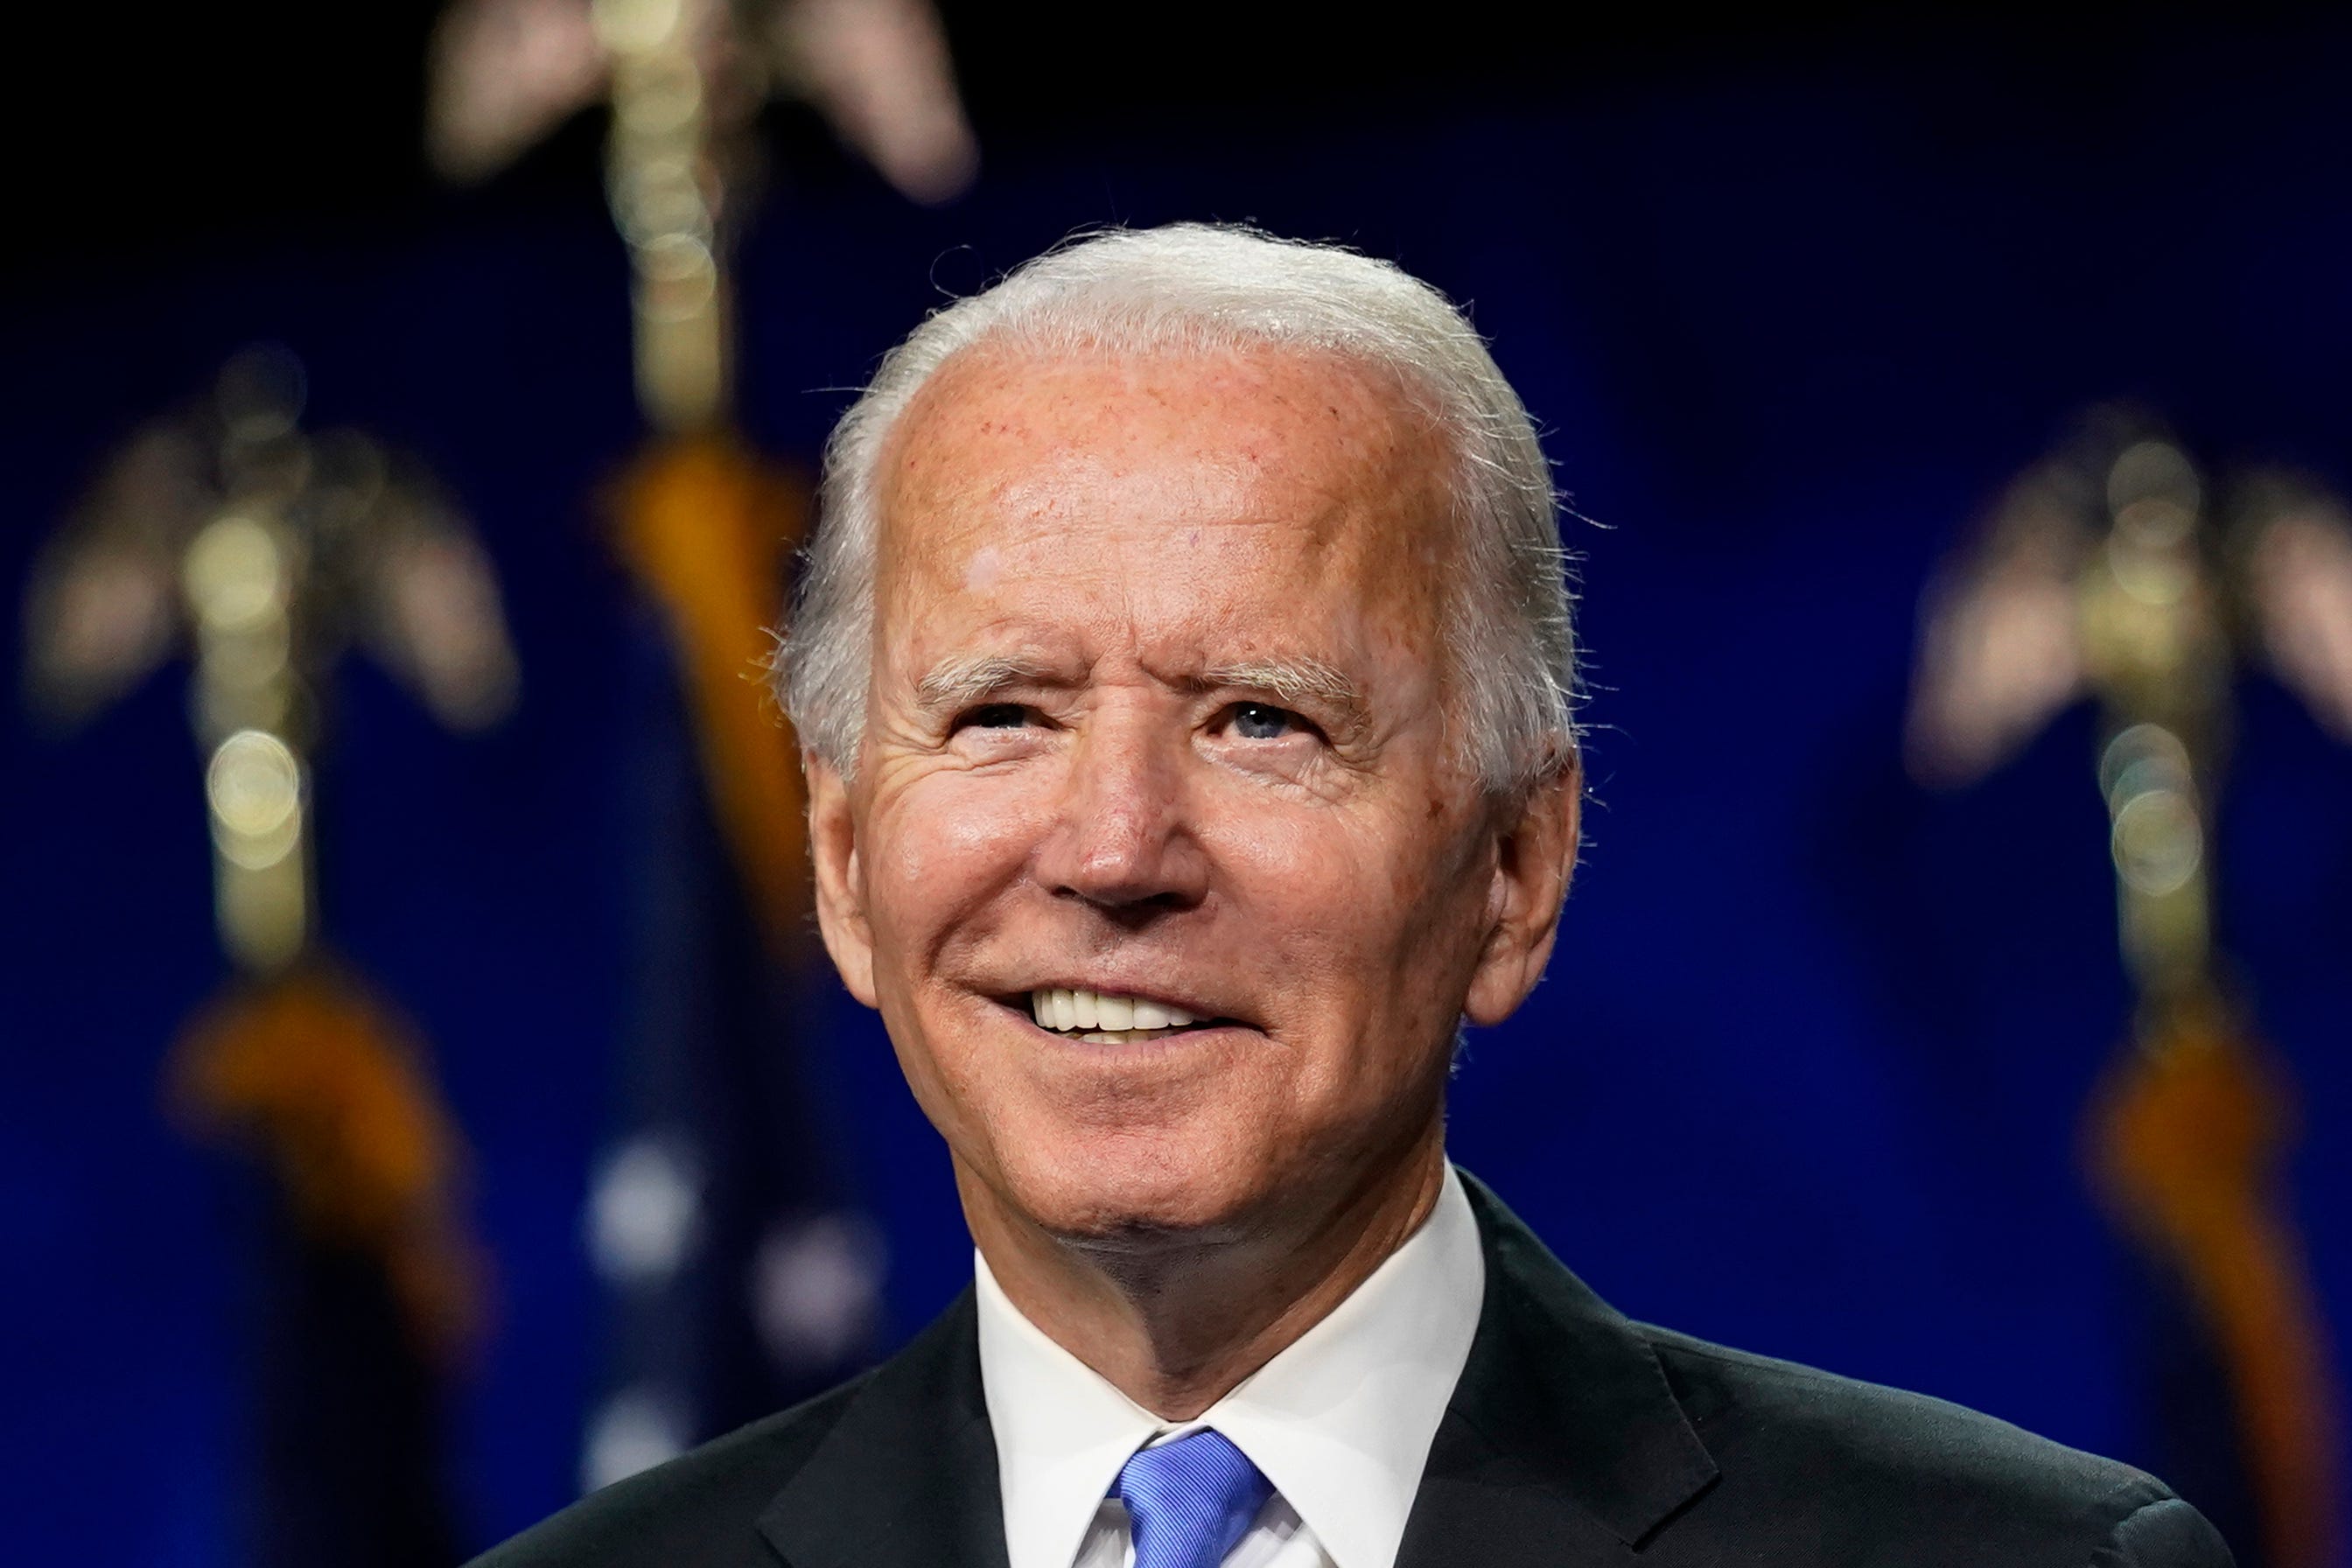 what is bussing joe biden - Biden|President|Joe|States|Delaware|Obama|Vice|Senate|Campaign|Election|Time|Administration|House|Law|People|Years|Family|Year|Trump|School|University|Senator|Office|Party|Country|Committee|Act|War|Days|Climate|Hunter|Health|America|State|Day|Democrats|Americans|Documents|Care|Plan|United States|Vice President|White House|Joe Biden|Biden Administration|Democratic Party|Law School|Presidential Election|President Joe Biden|Executive Orders|Foreign Relations Committee|Presidential Campaign|Second Term|47Th Vice President|Syracuse University|Climate Change|Hillary Clinton|Last Year|Barack Obama|Joseph Robinette Biden|U.S. Senator|Health Care|U.S. Senate|Donald Trump|President Trump|President Biden|Federal Register|Judiciary Committee|Presidential Nomination|Presidential Medal